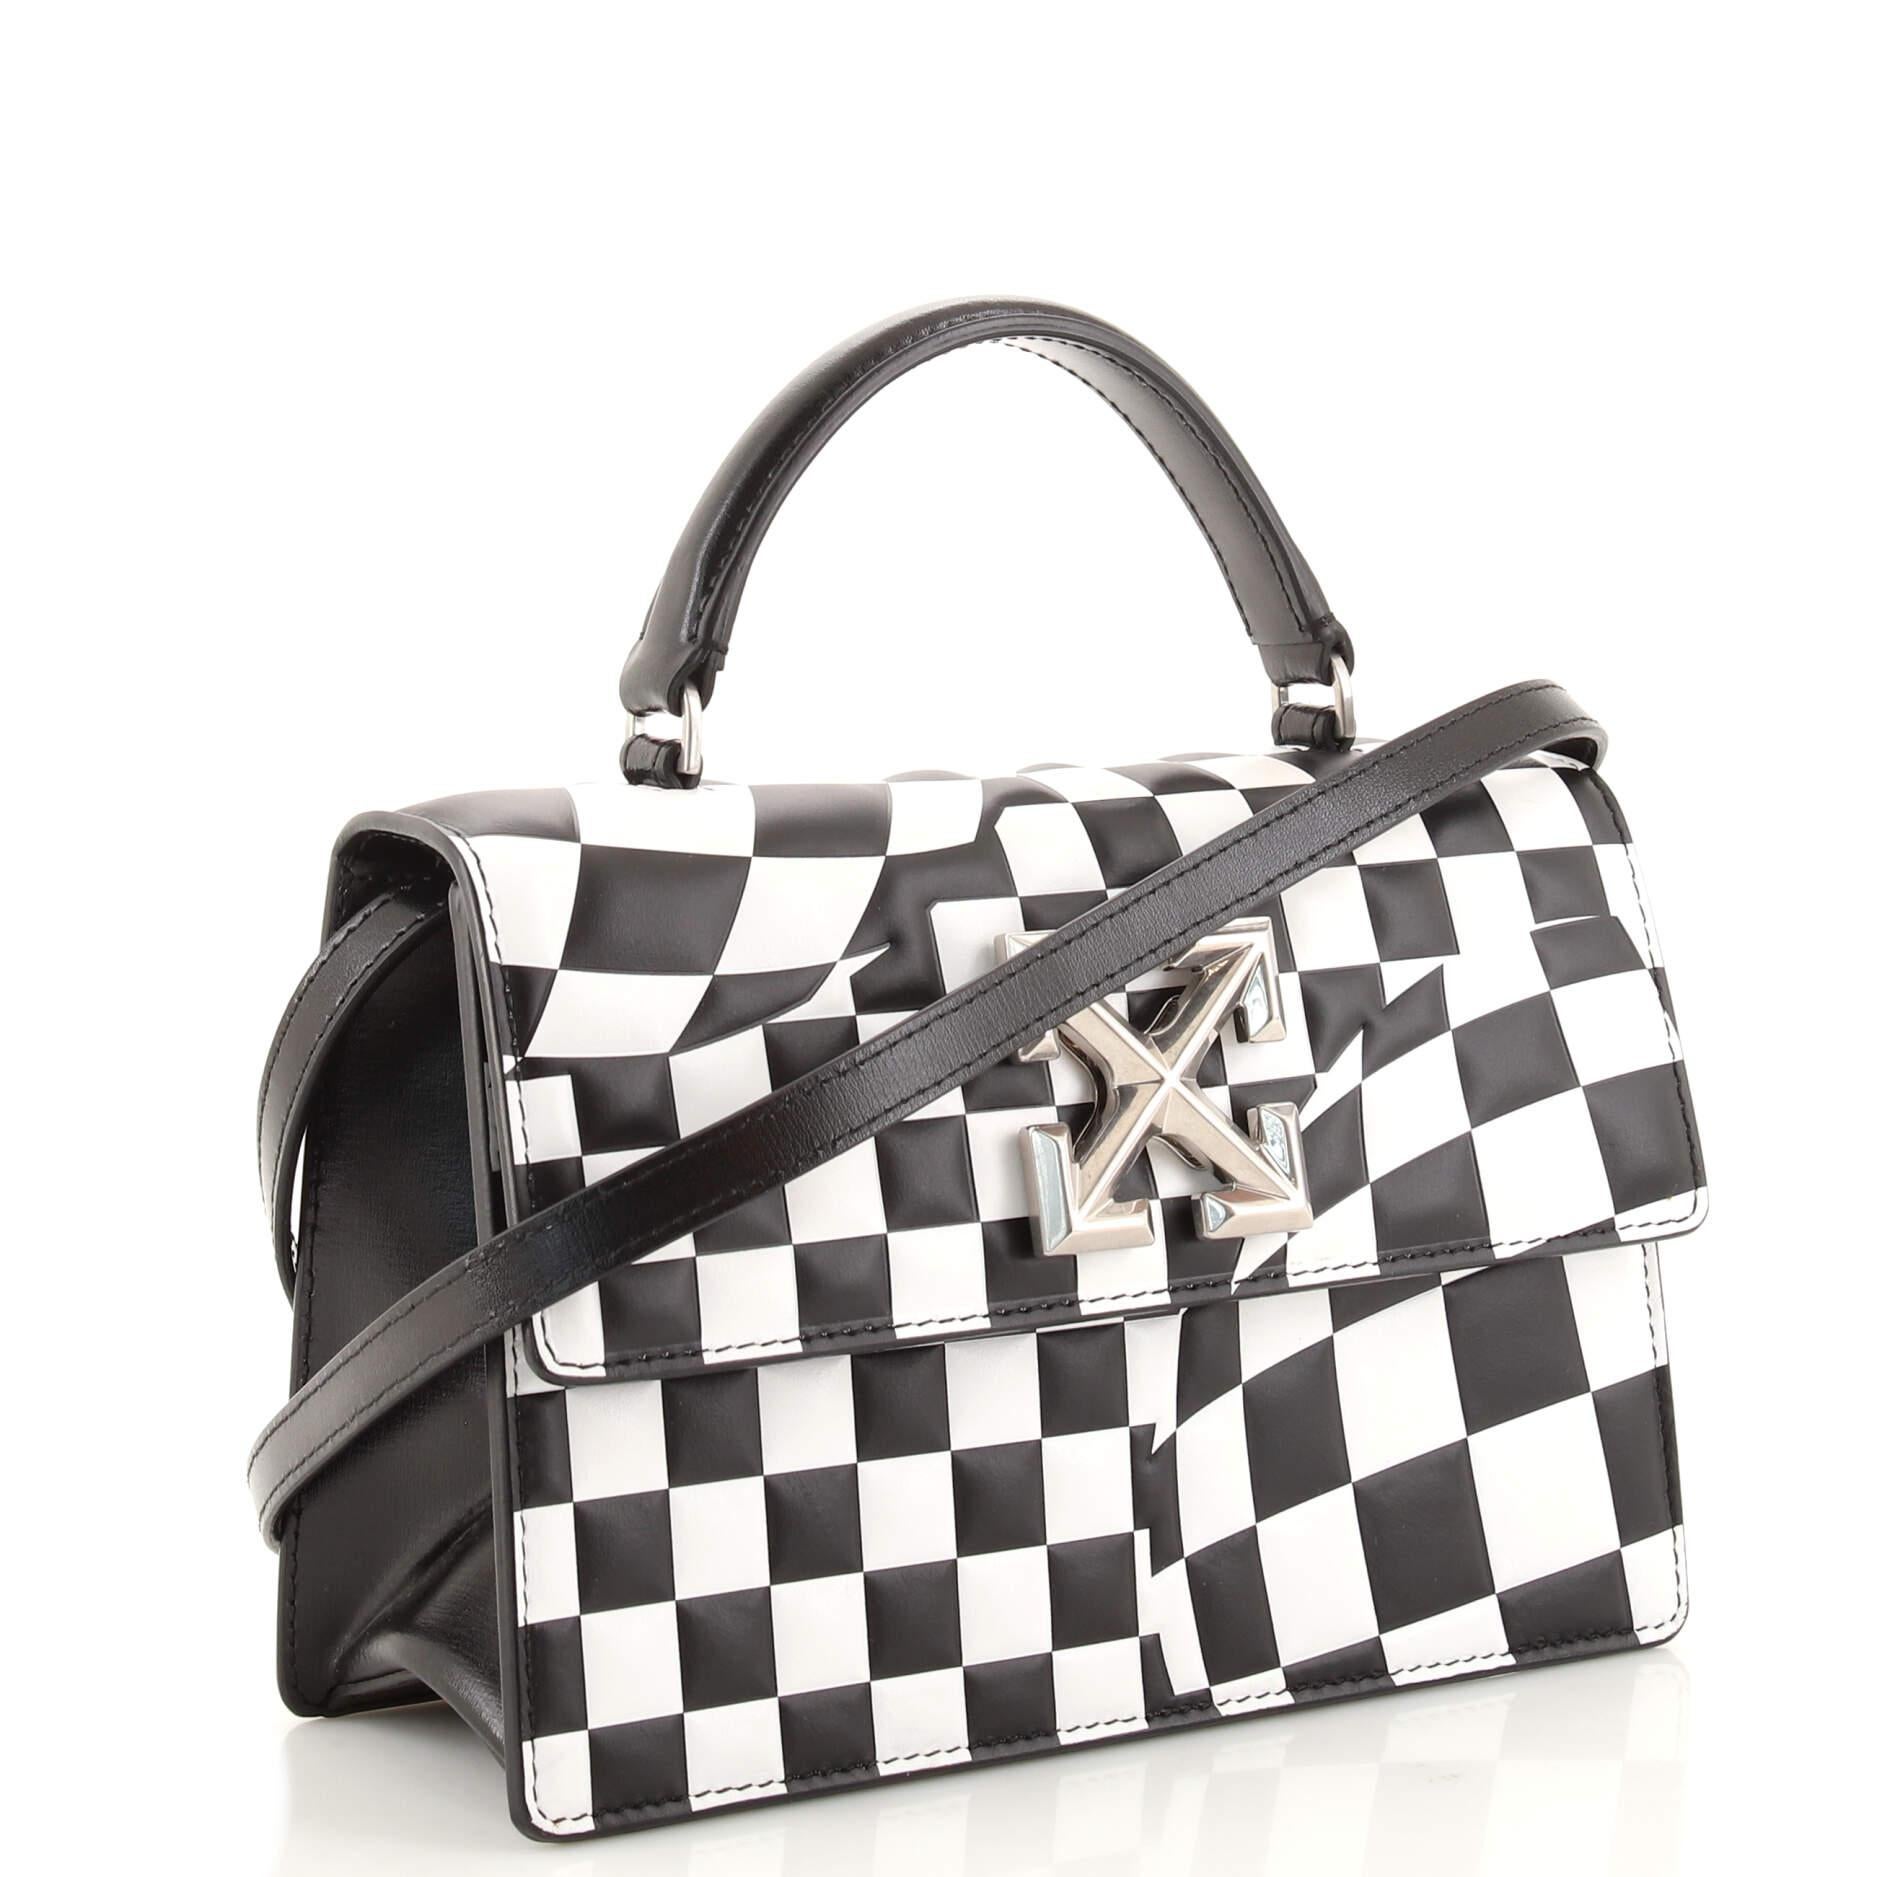 Jitney 1.4 printed leather tote